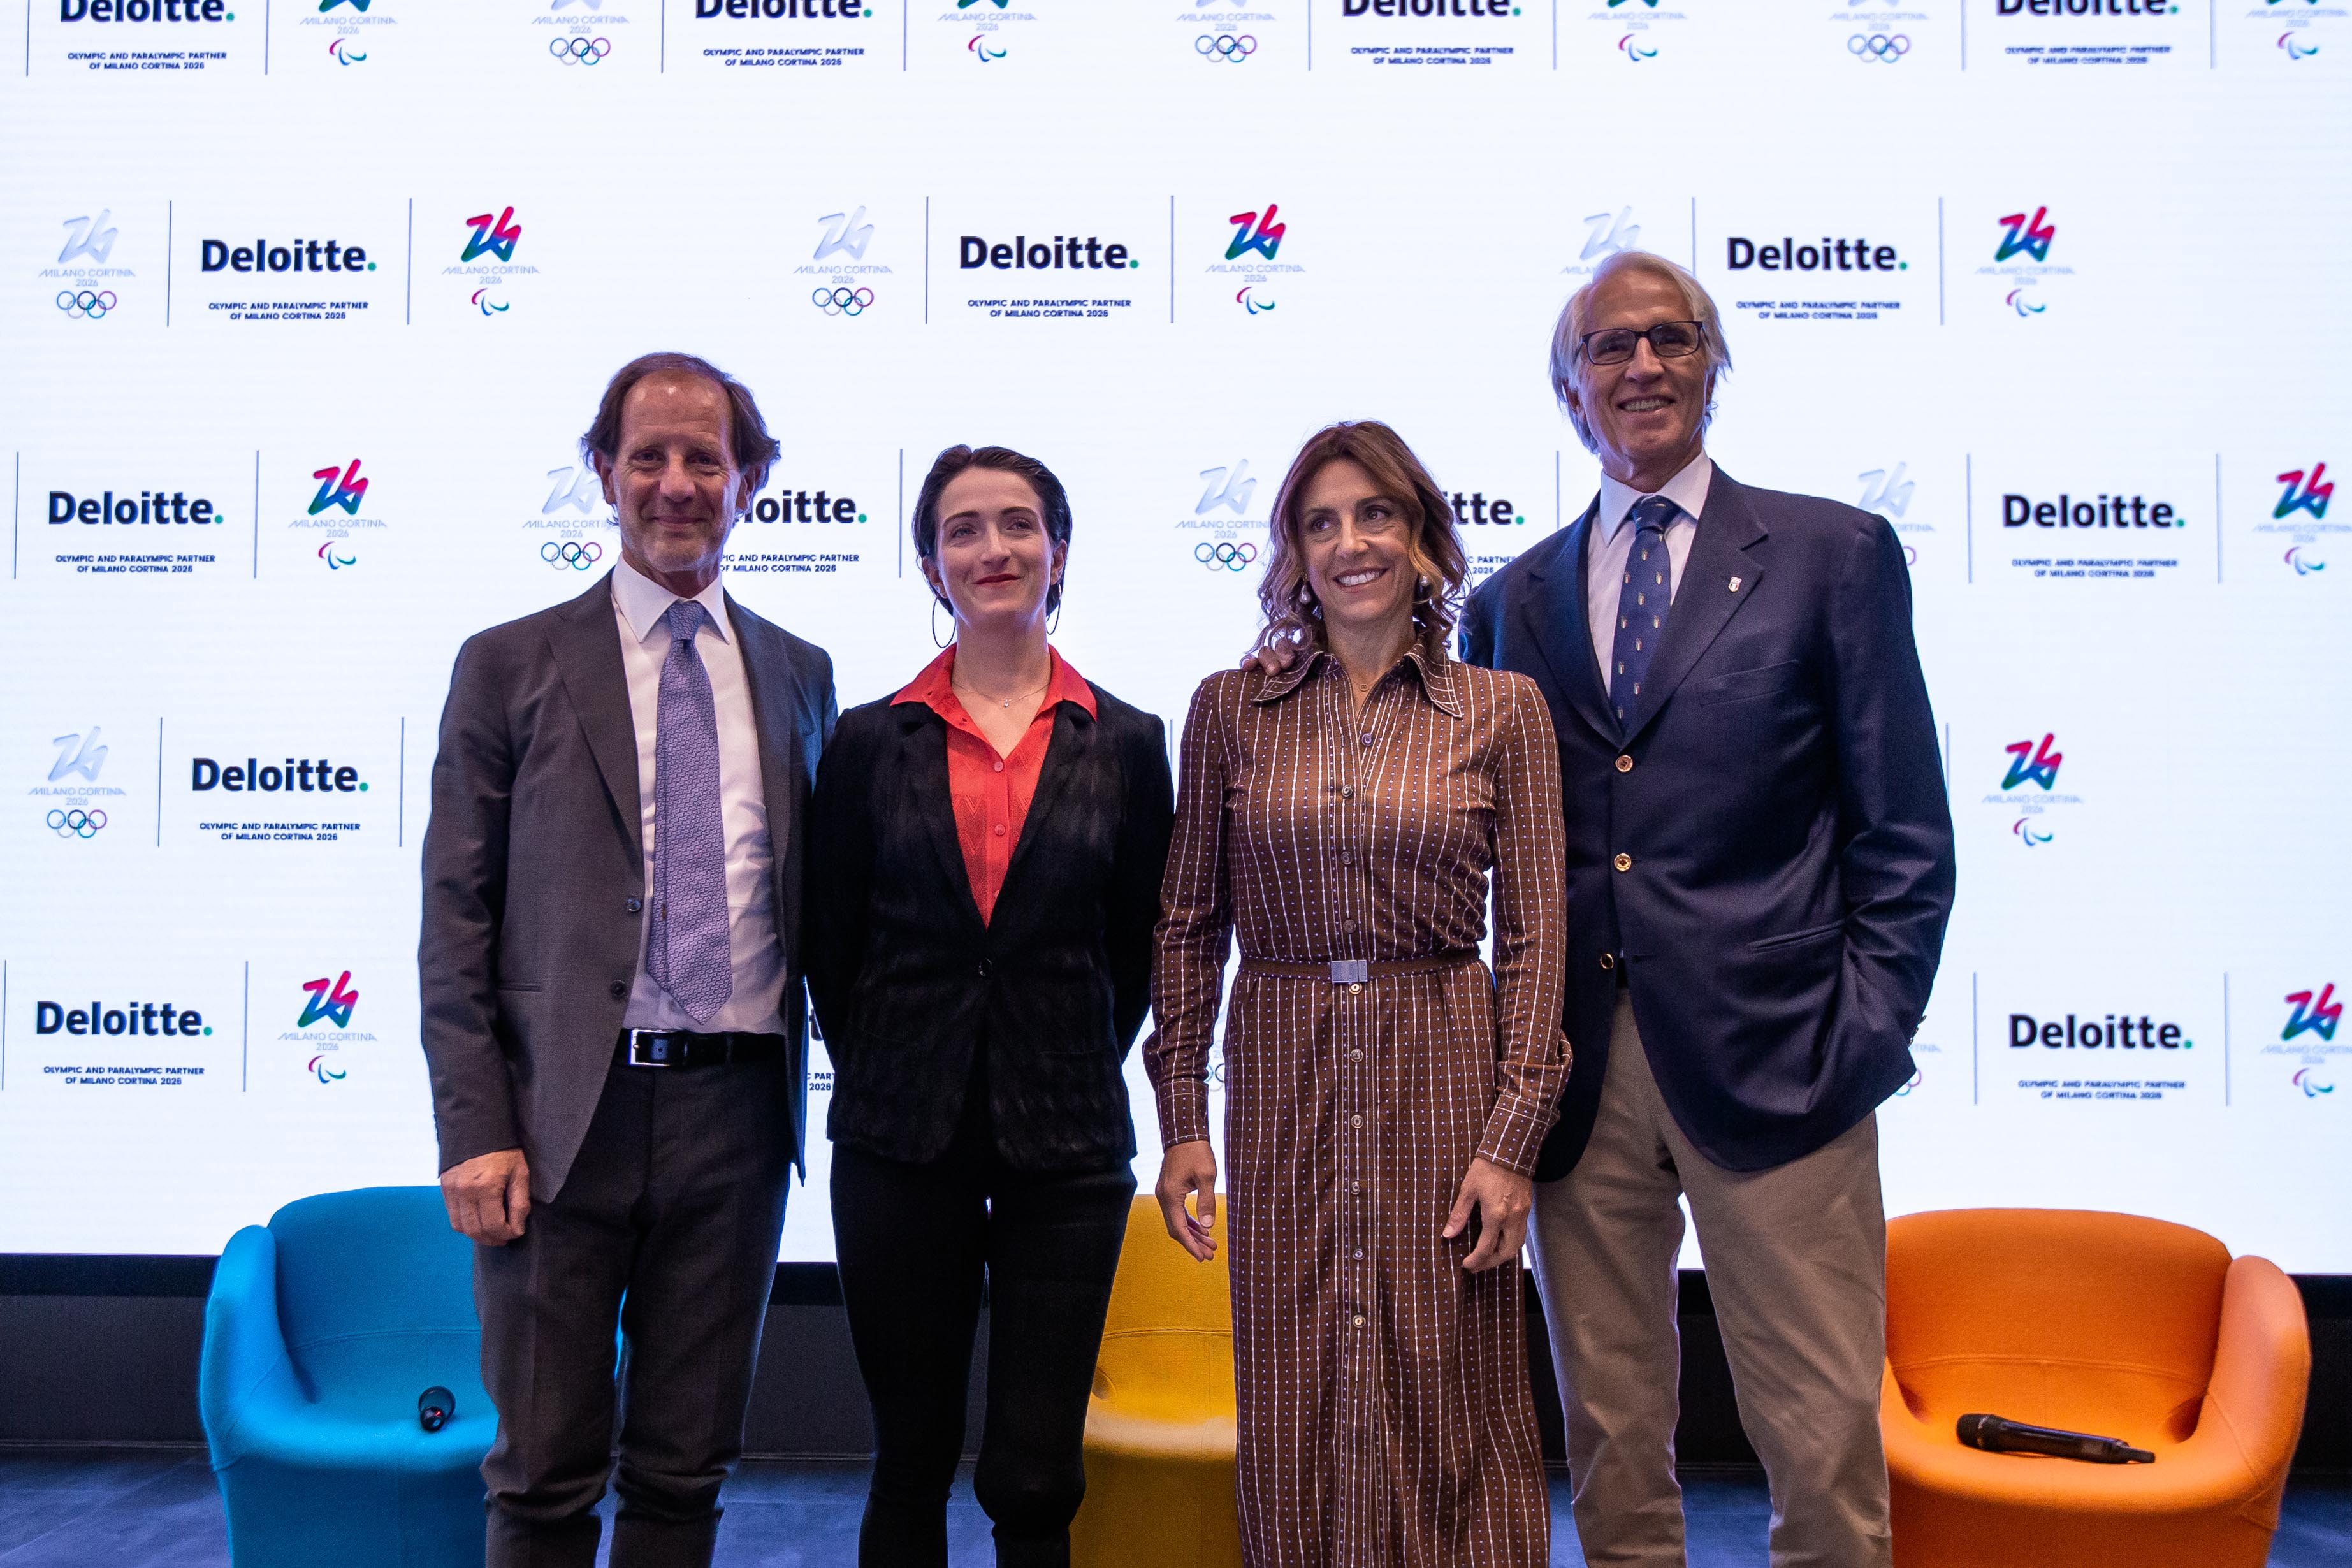 Photos of the main contact persons of Deloitte and Milan Cortina 2026